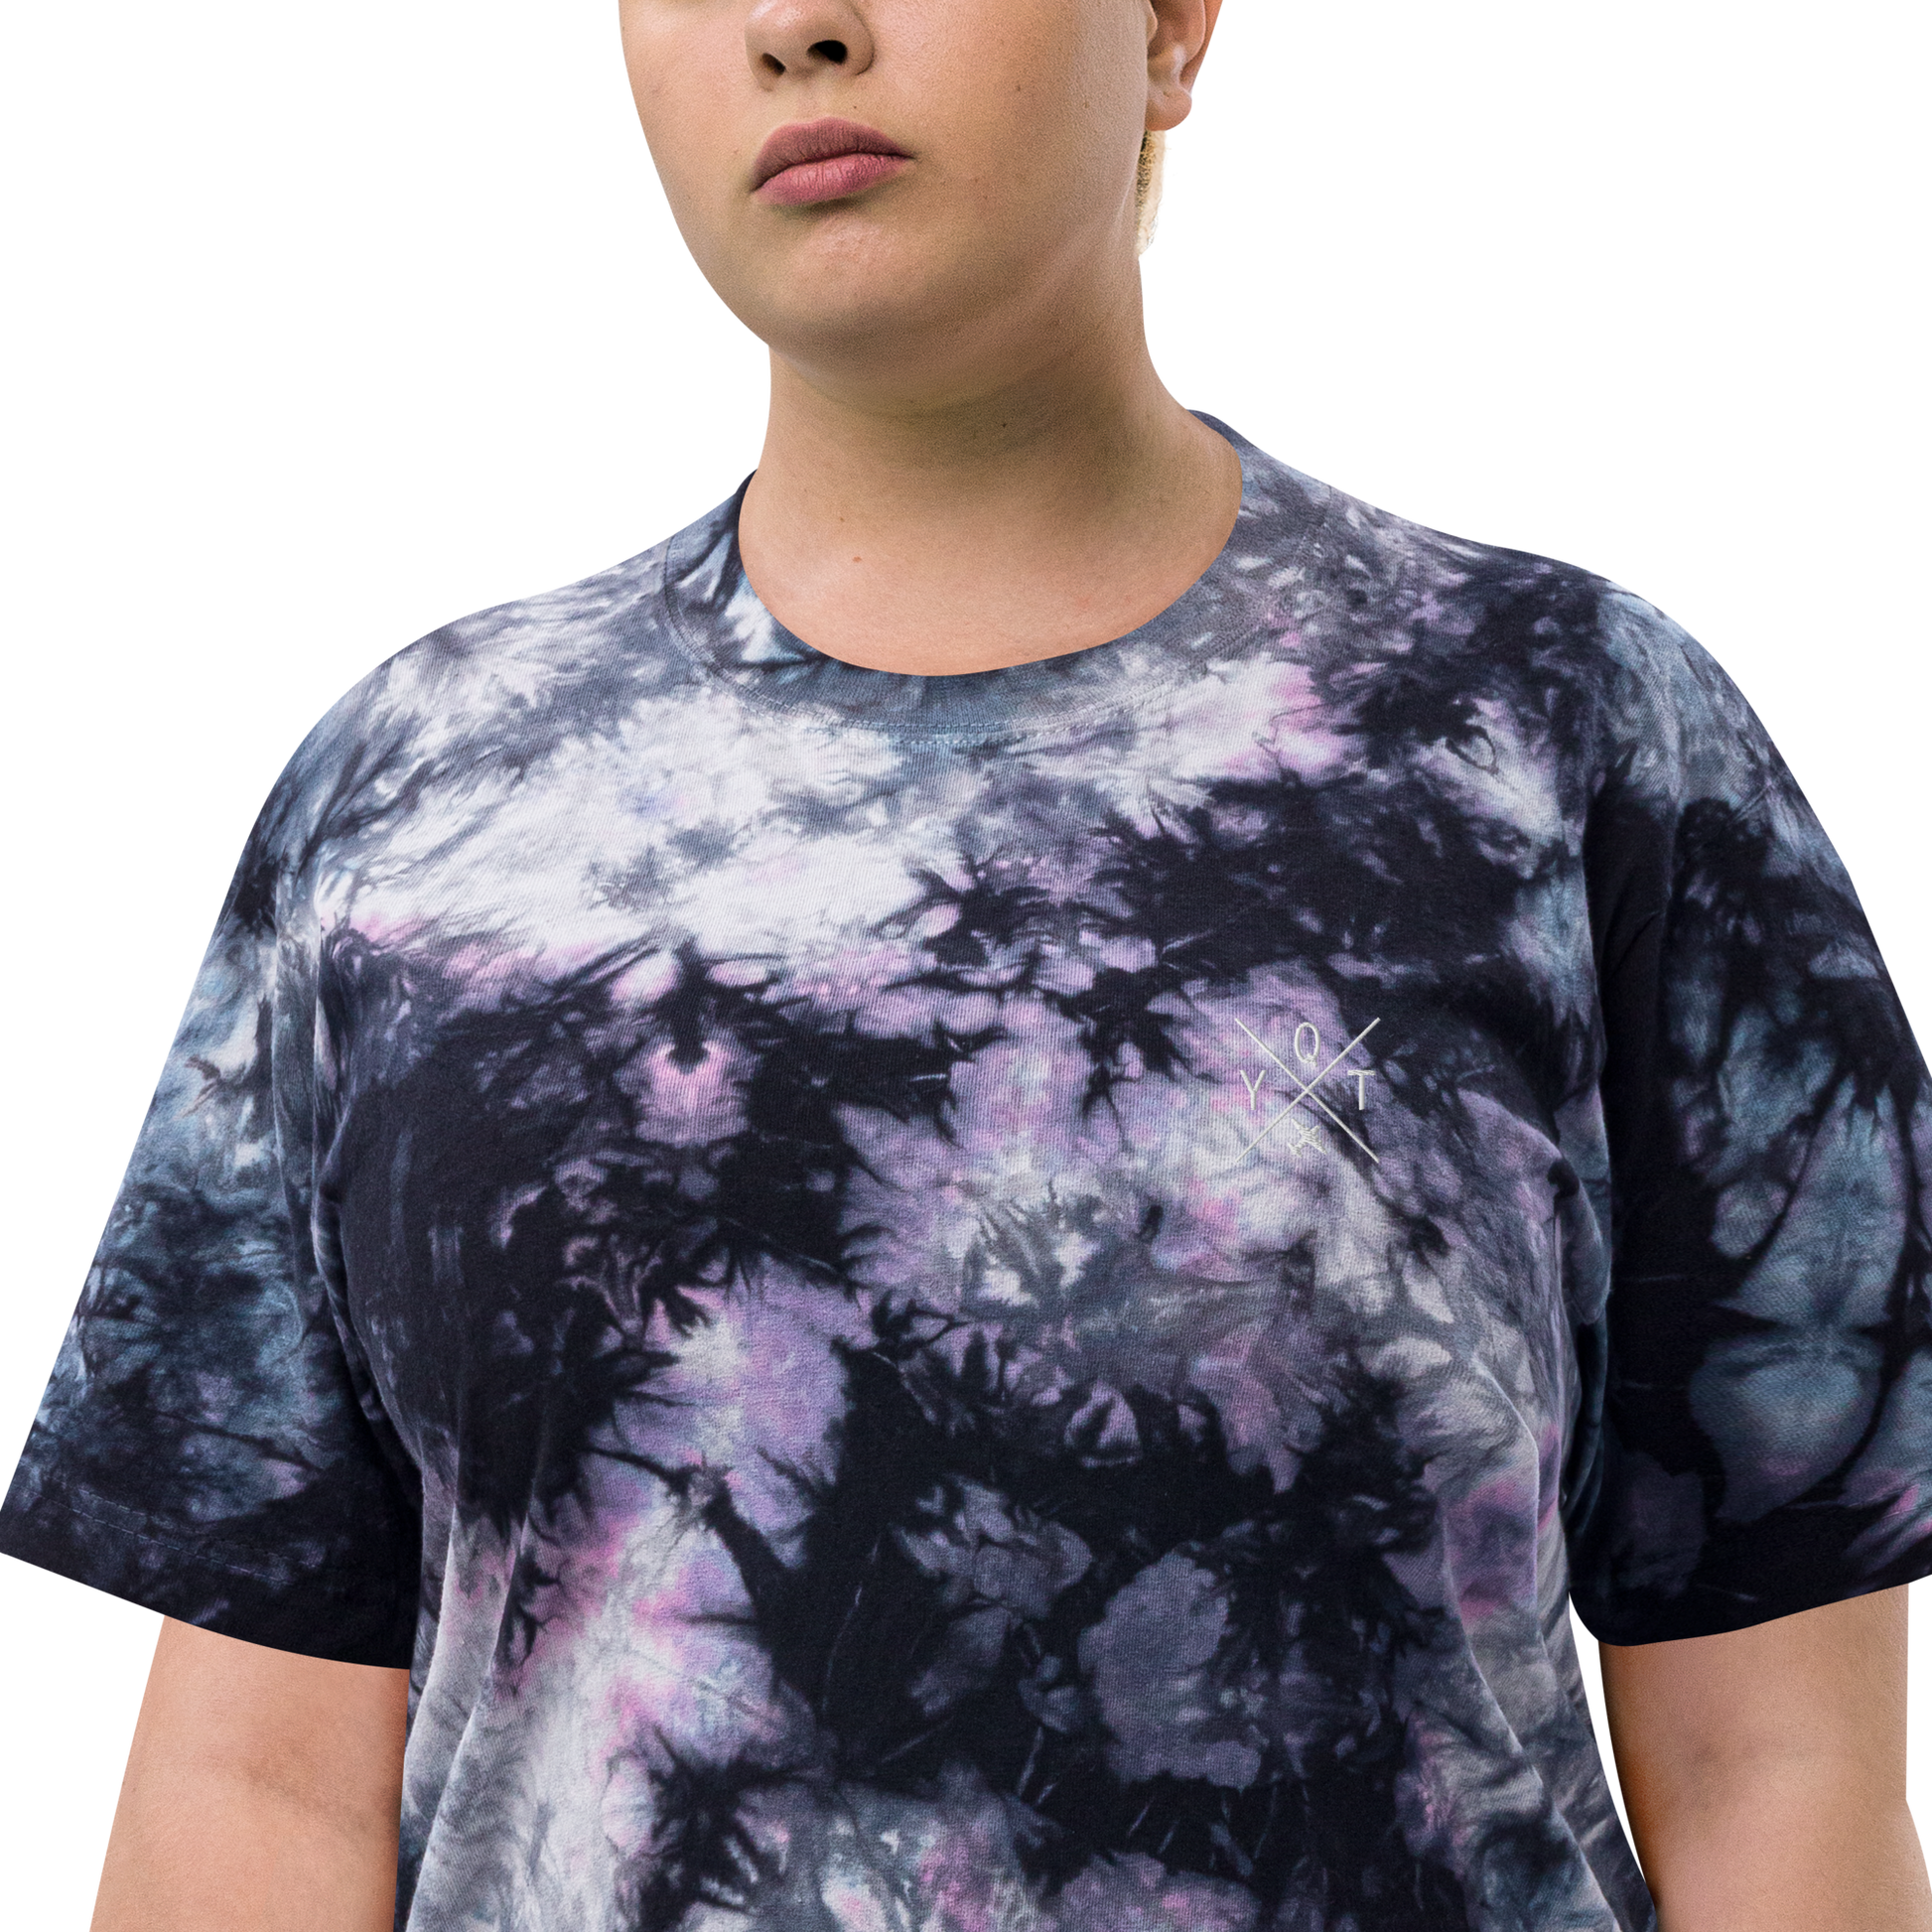 YHM Designs - YQT Thunder Bay Oversized Tie-Dye T-Shirt - Crossed-X Design with Airport Code and Vintage Propliner - White Embroidery - Image 07